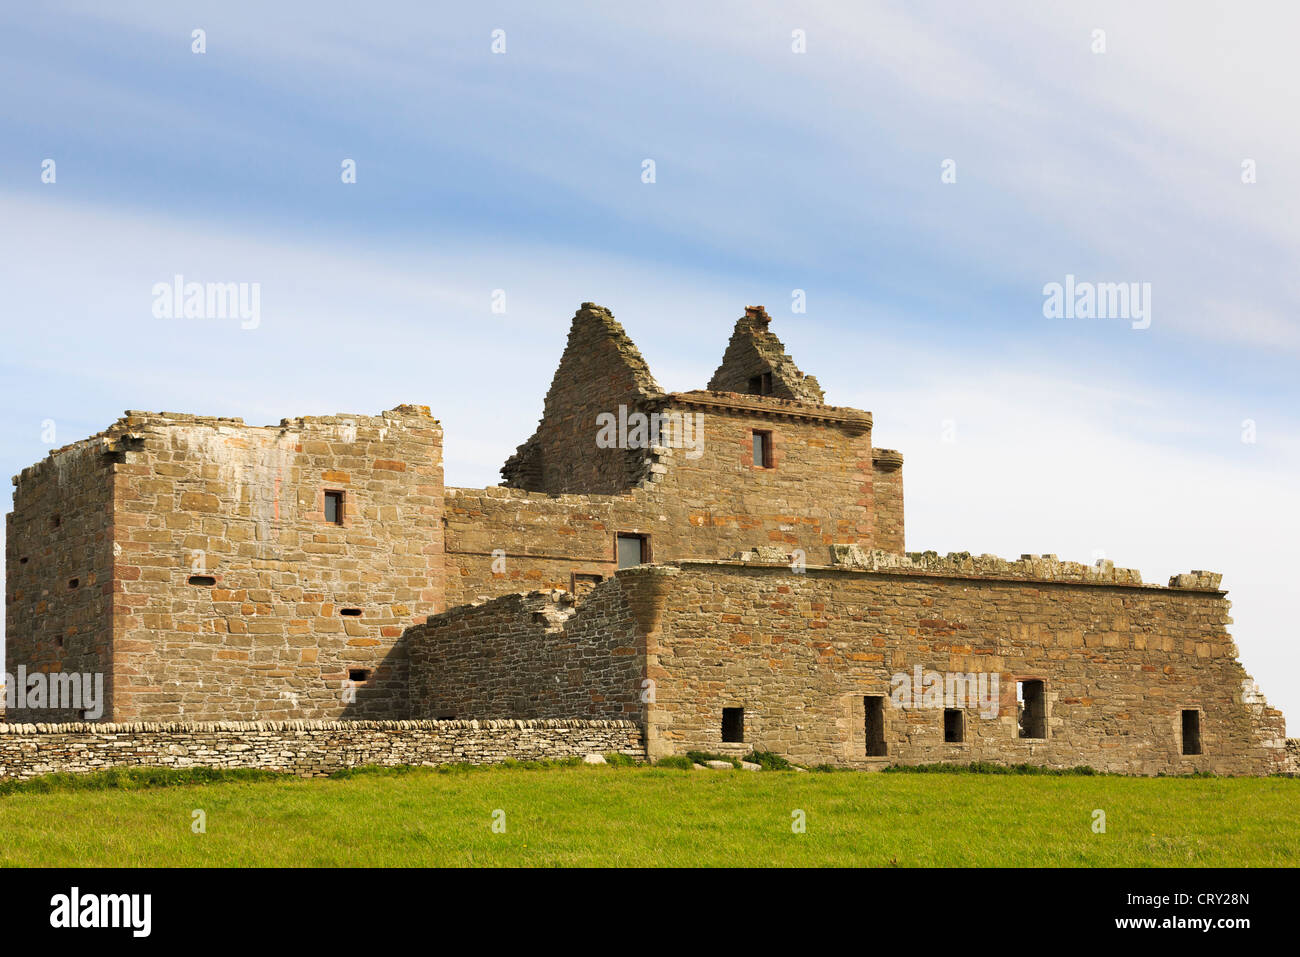 Ruined remains of 16th century Noltland Castle built by Gilbert Balfour at Pierowall, Westray Island Orkney Islands Scotland UK Stock Photo